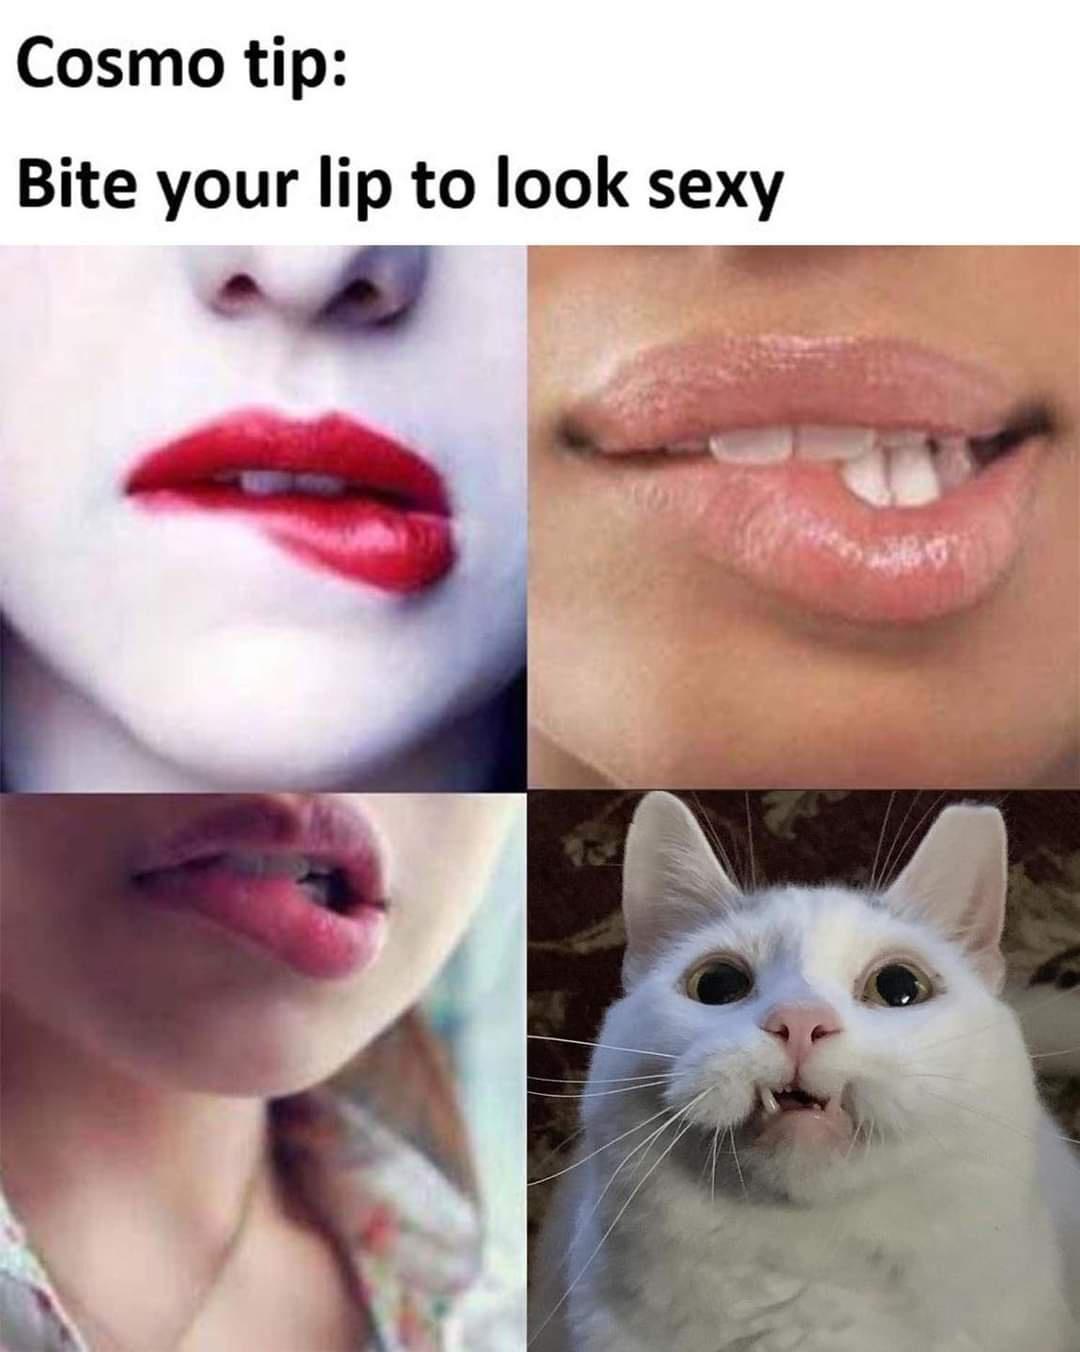 do girls bite their lips - Cosmo tip Bite your lip to look sexy